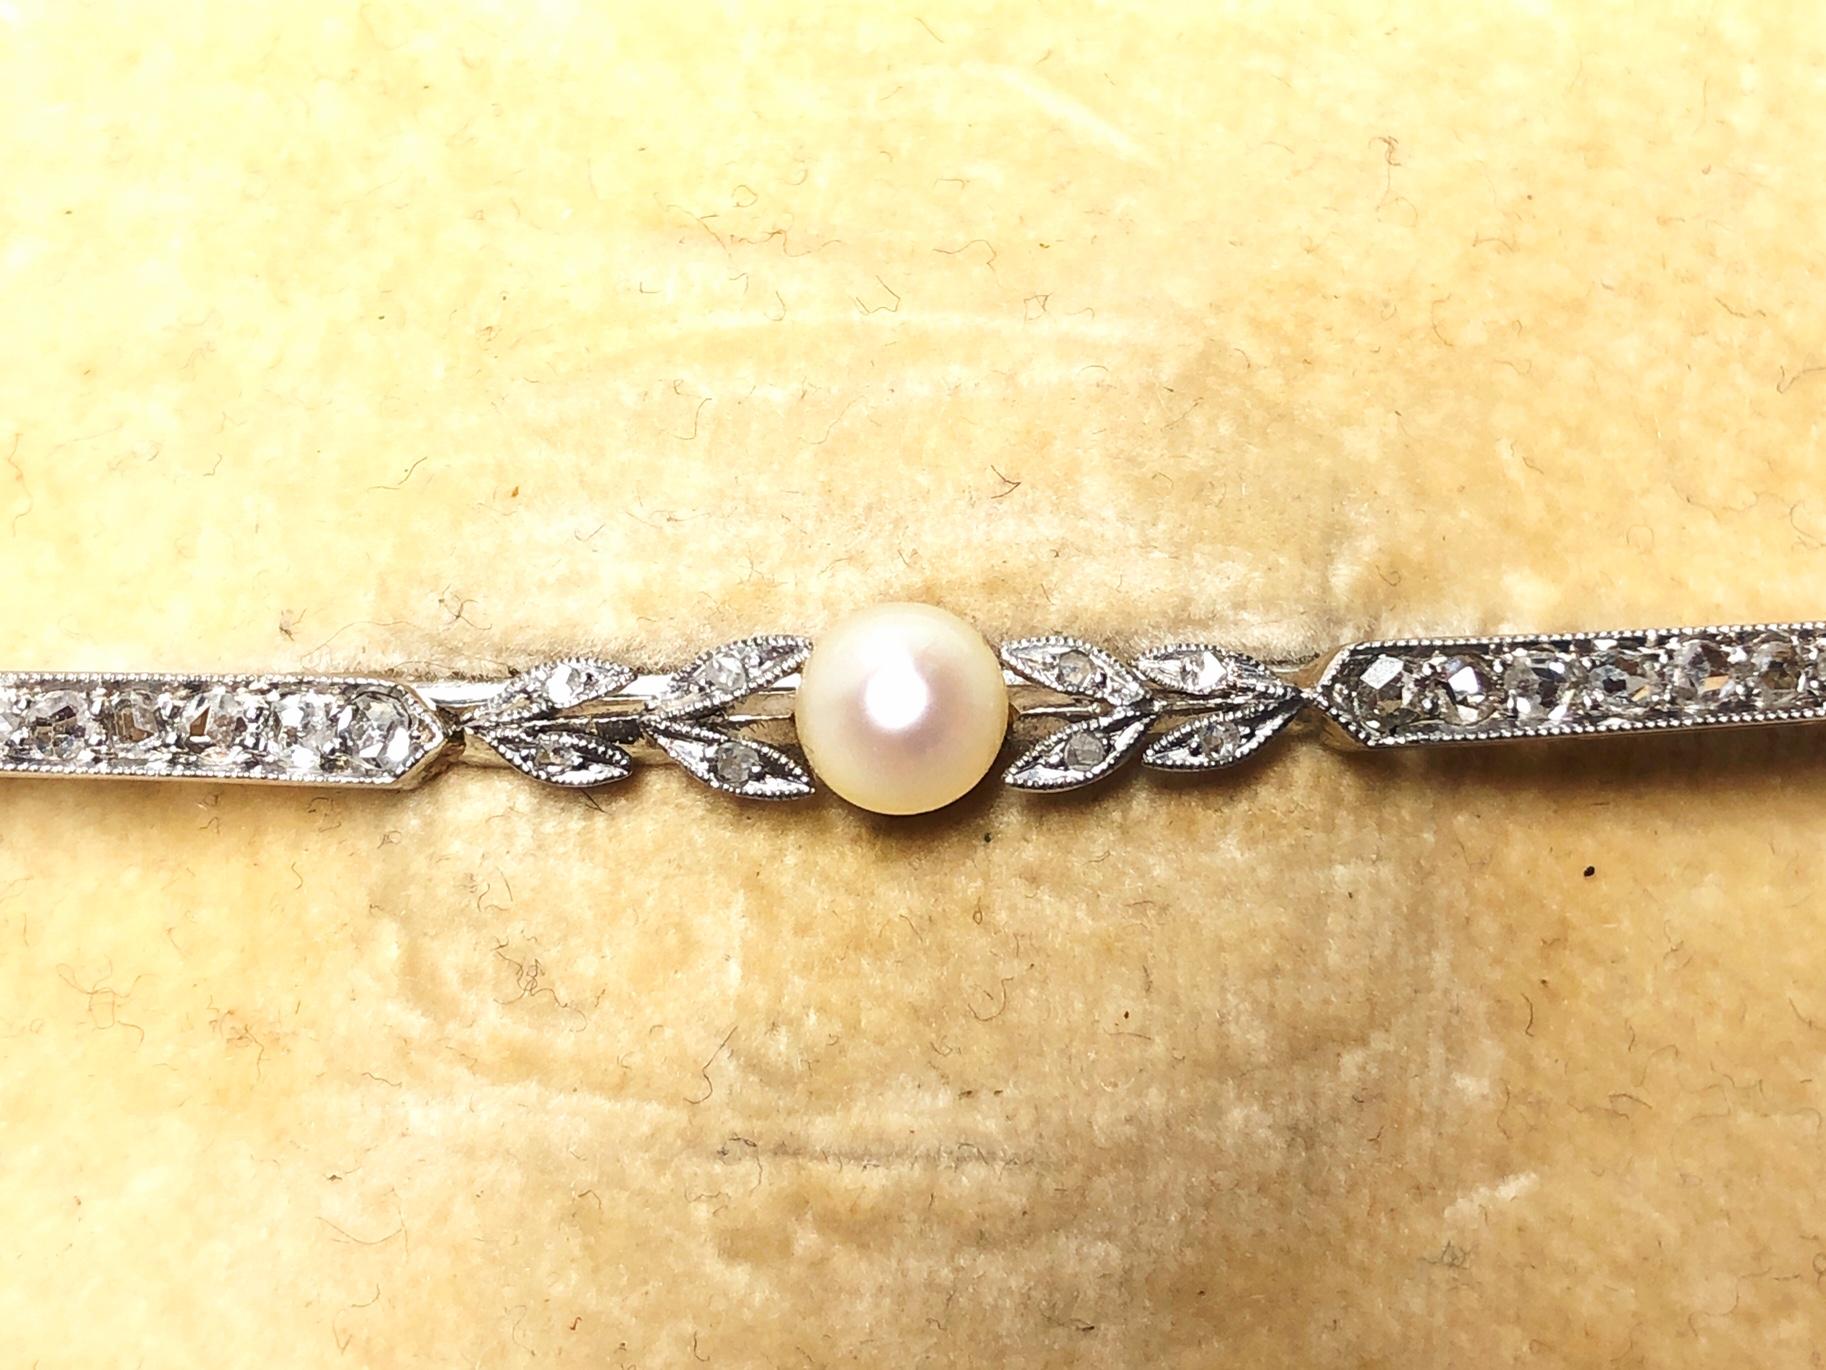 A natural pearl and diamond bar brooch, centrally set with a 5.2mm natural pearl, with graduating rose cut diamonds to each side, set in an elongated bar, with an estimated total diamond weight 0.60ct, mounted in platinum. Circa 1910.

The brooch